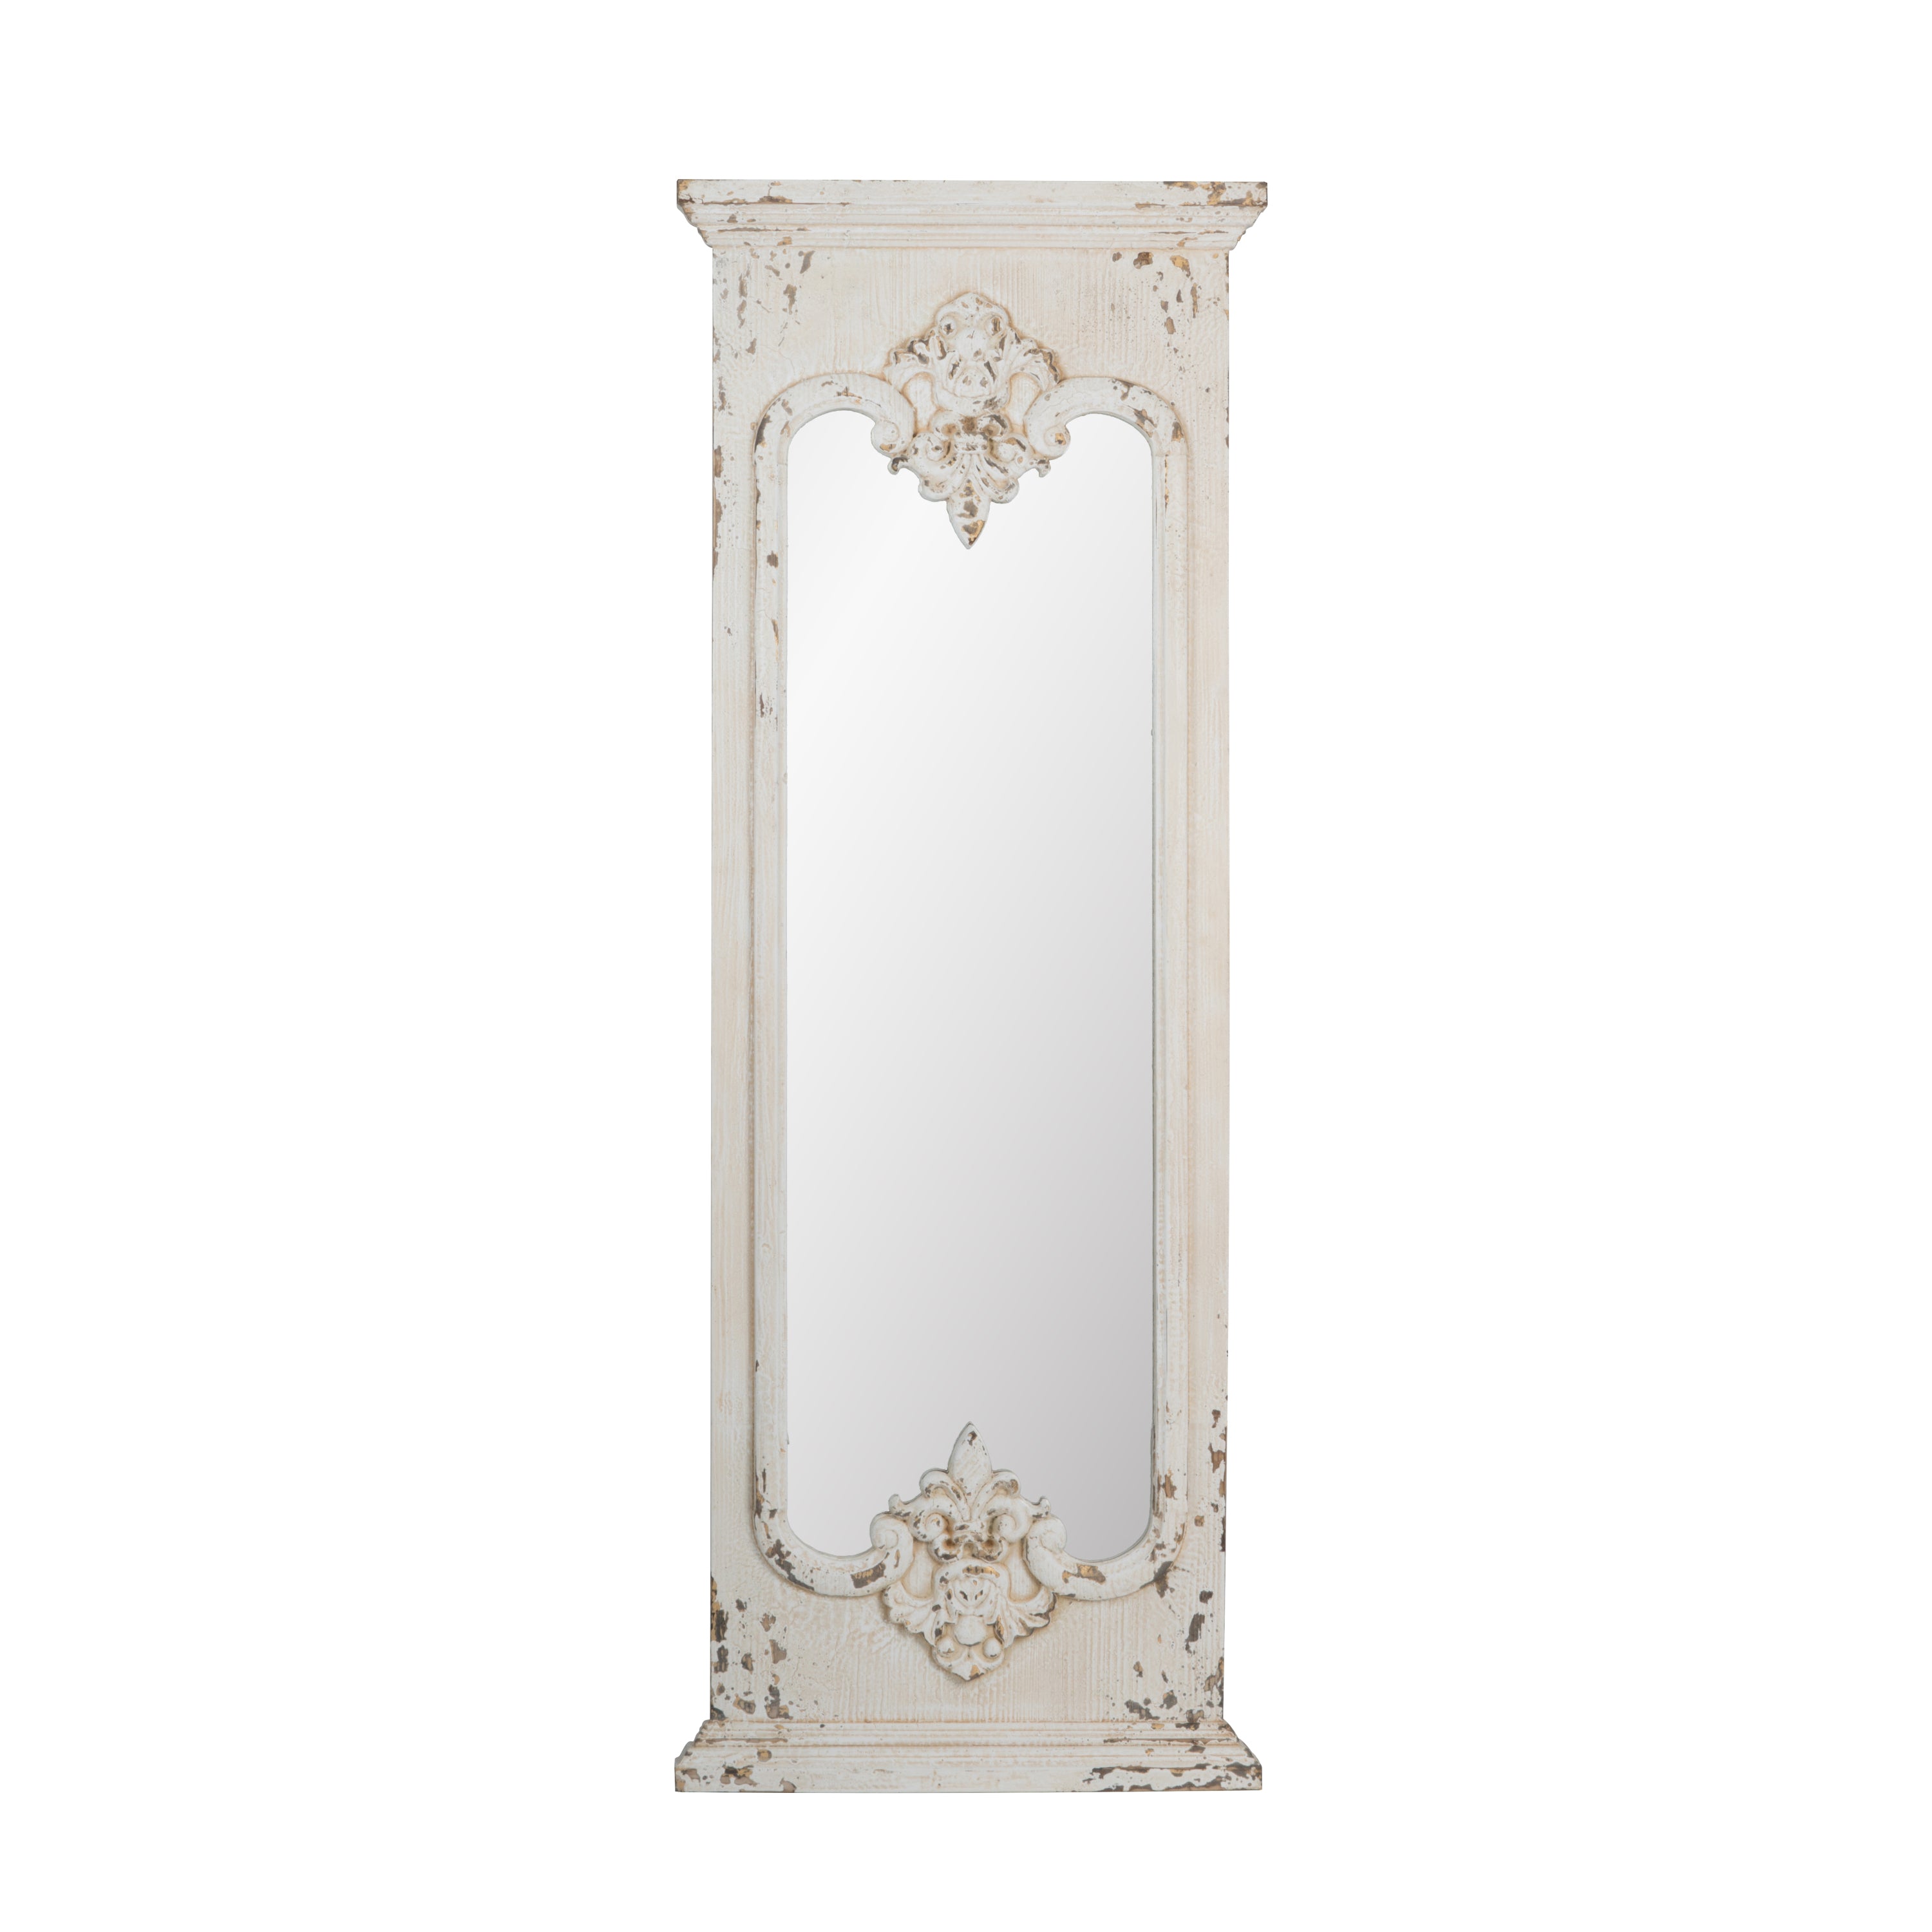 French Country Style Full Length Mirror with Solid Wood Frame 21.5"x59"